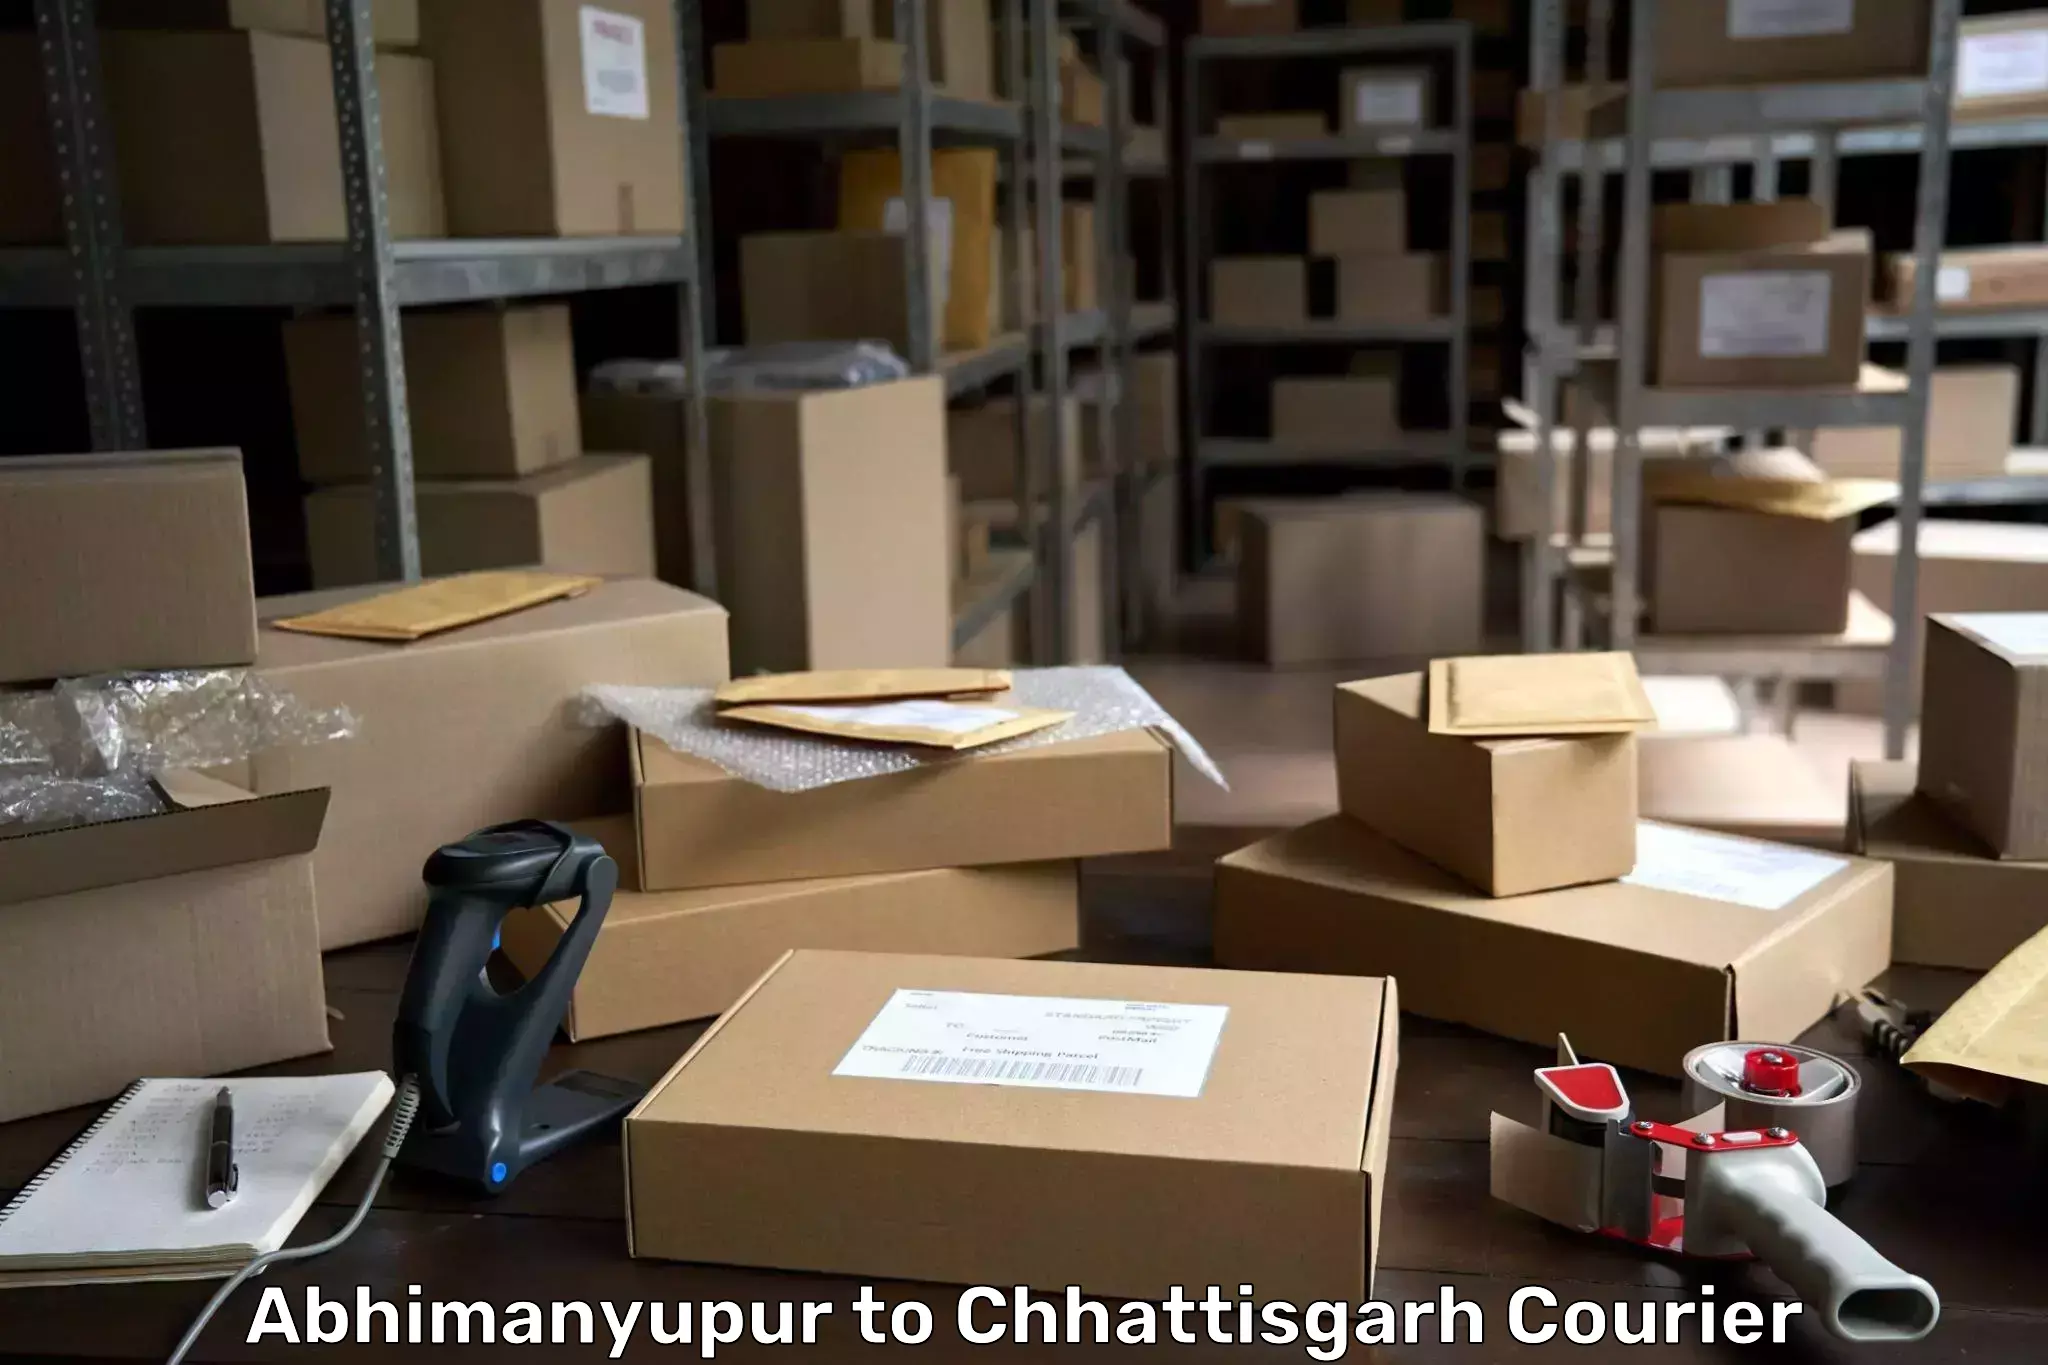 Same-day delivery solutions Abhimanyupur to Korea Chhattisgarh